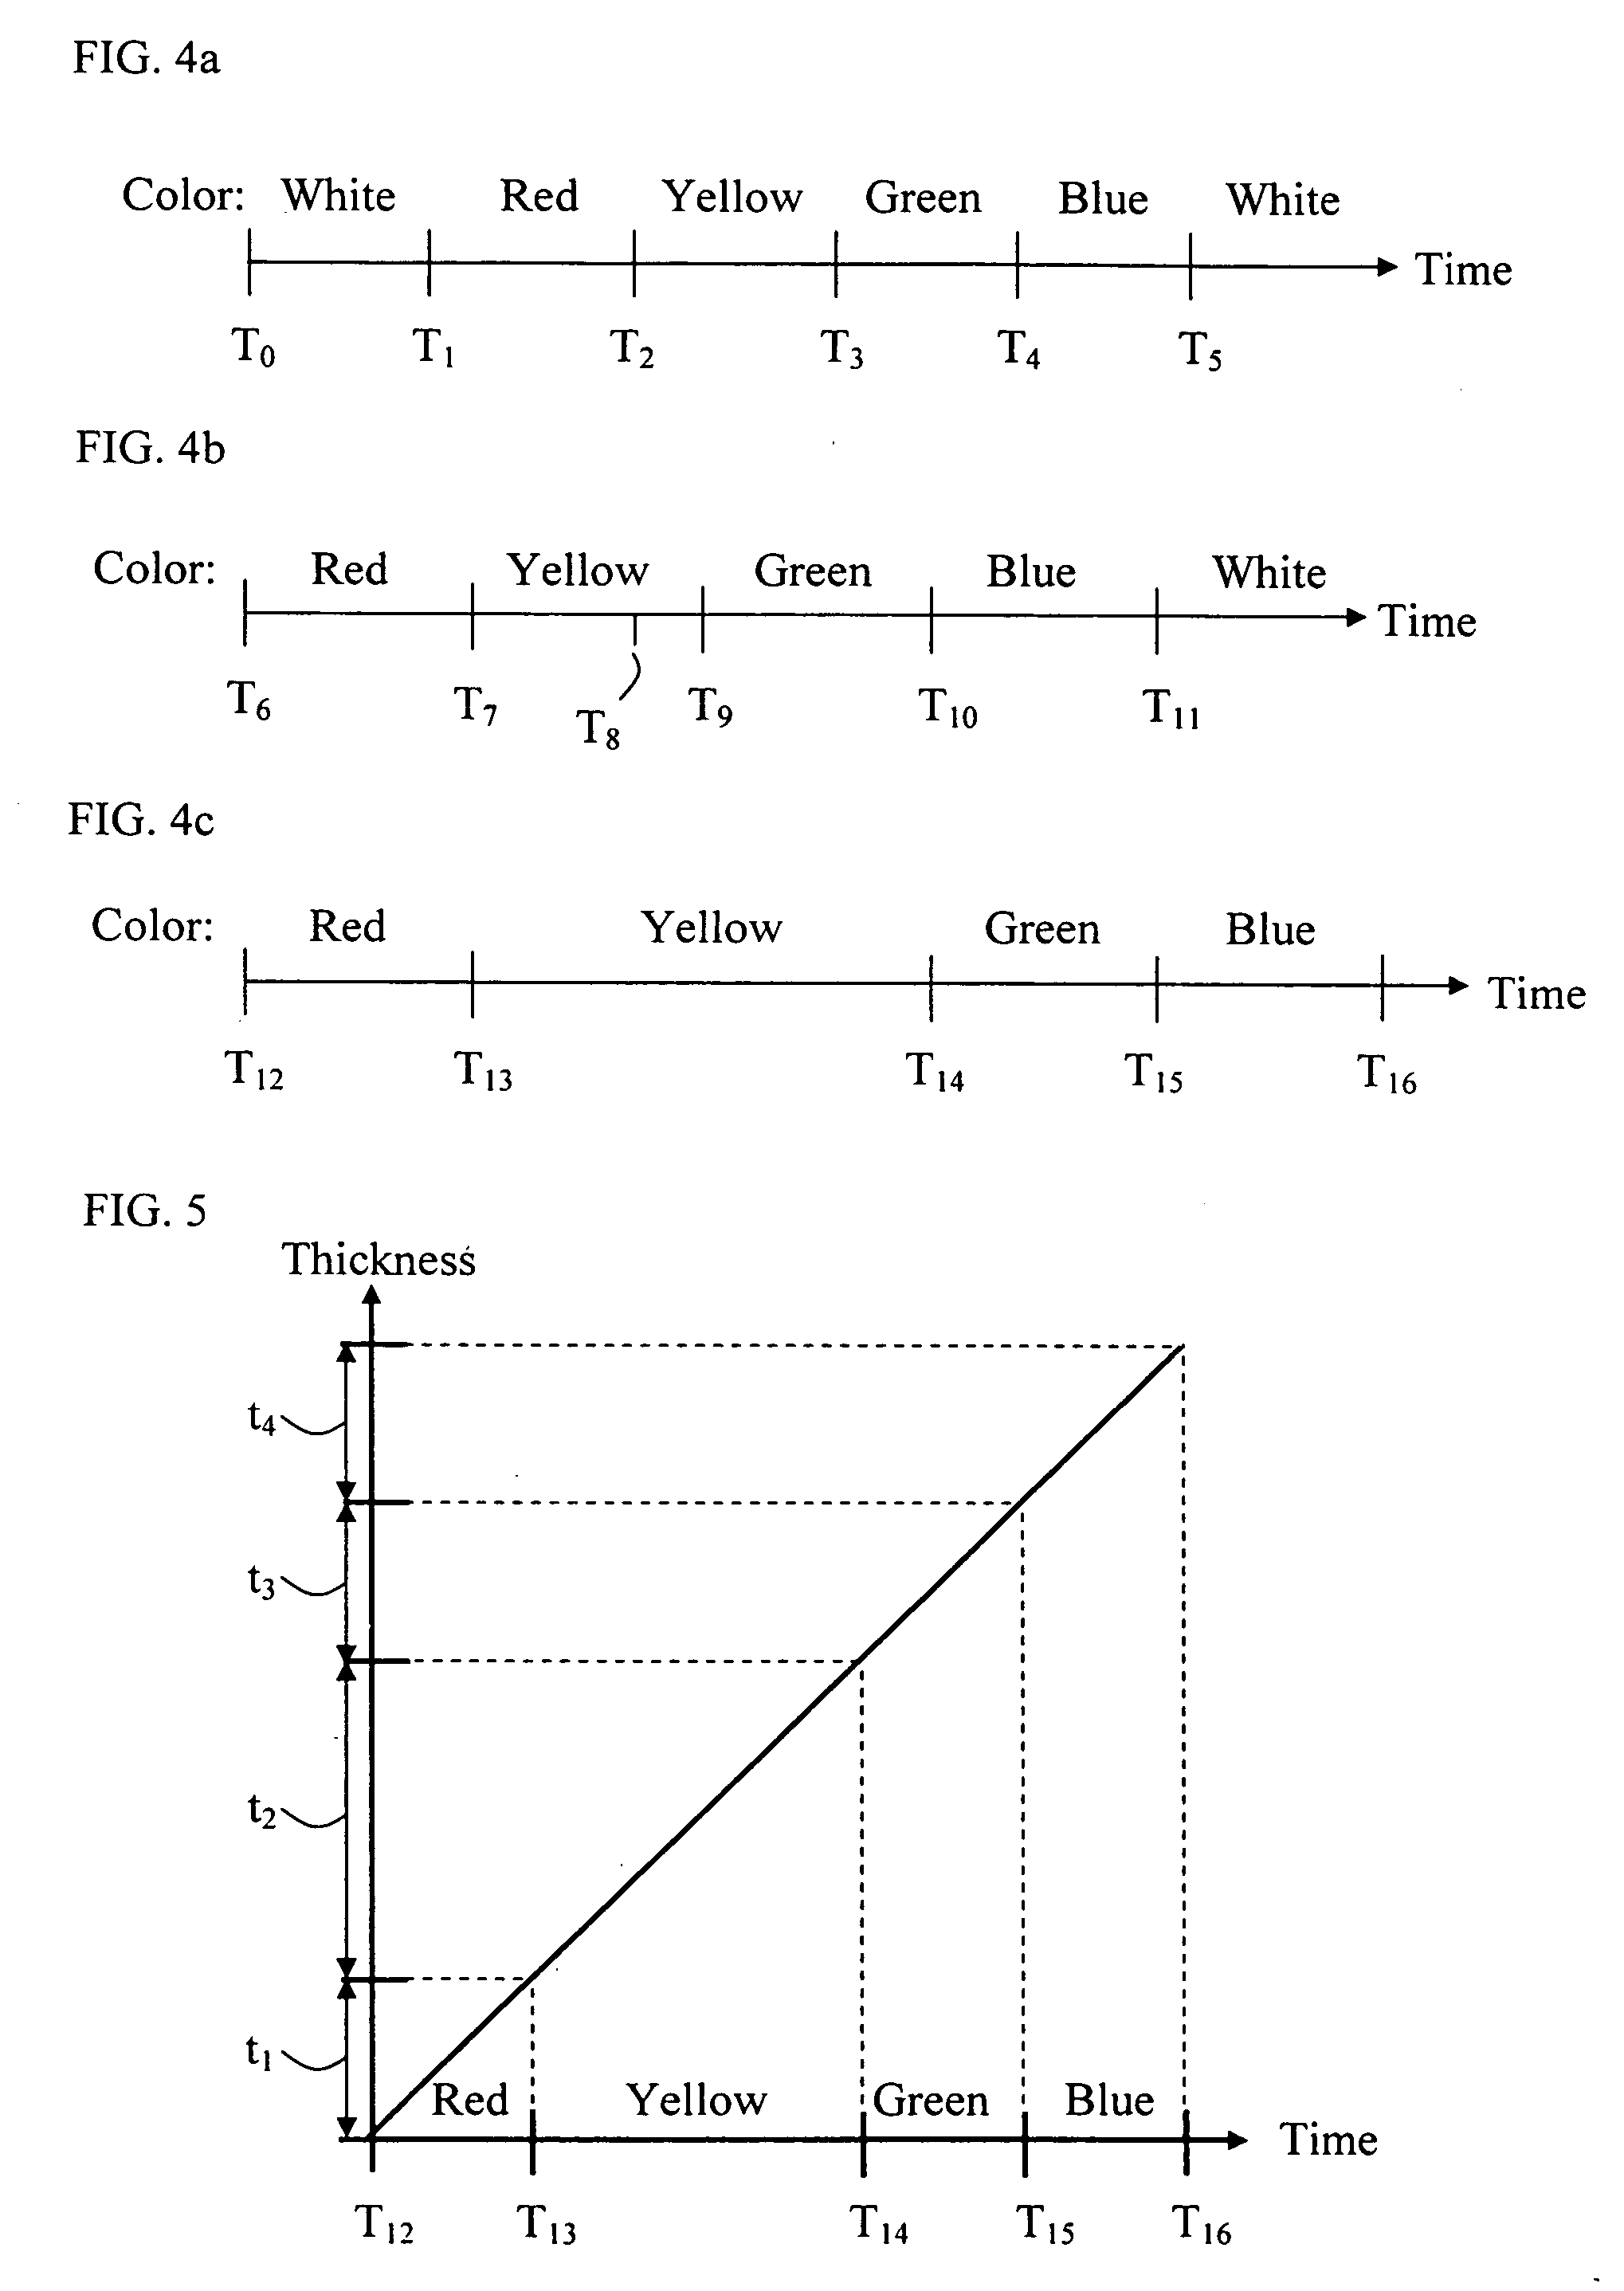 Dentrifrice and method of making the same